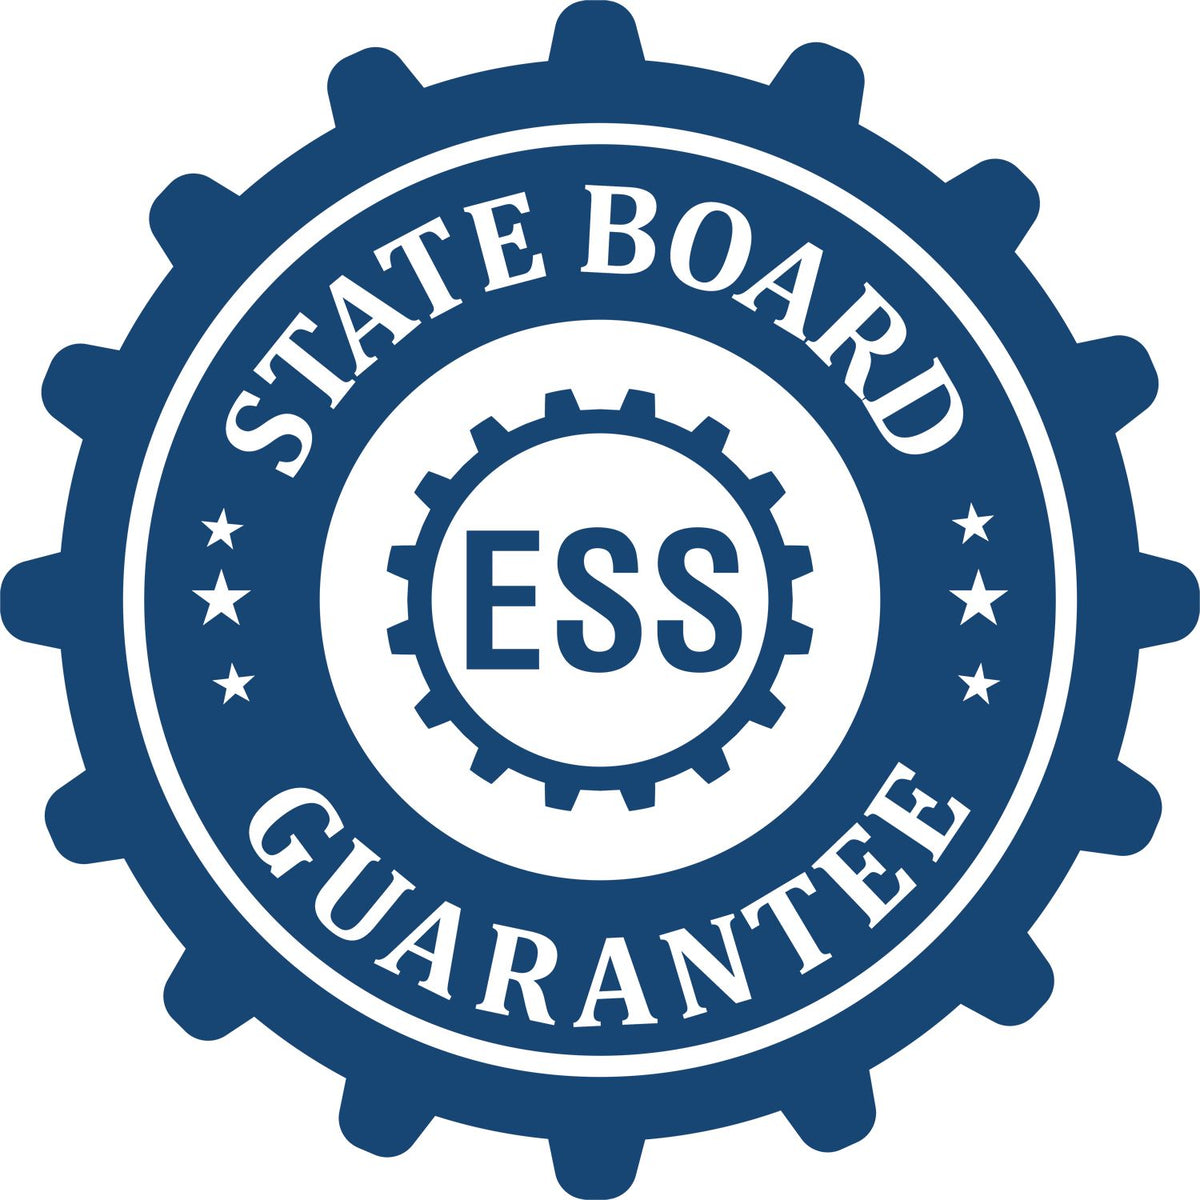 An emblem in a gear shape illustrating a state board guarantee for the Heavy Duty Cast Iron Arkansas Engineer Seal Embosser product.